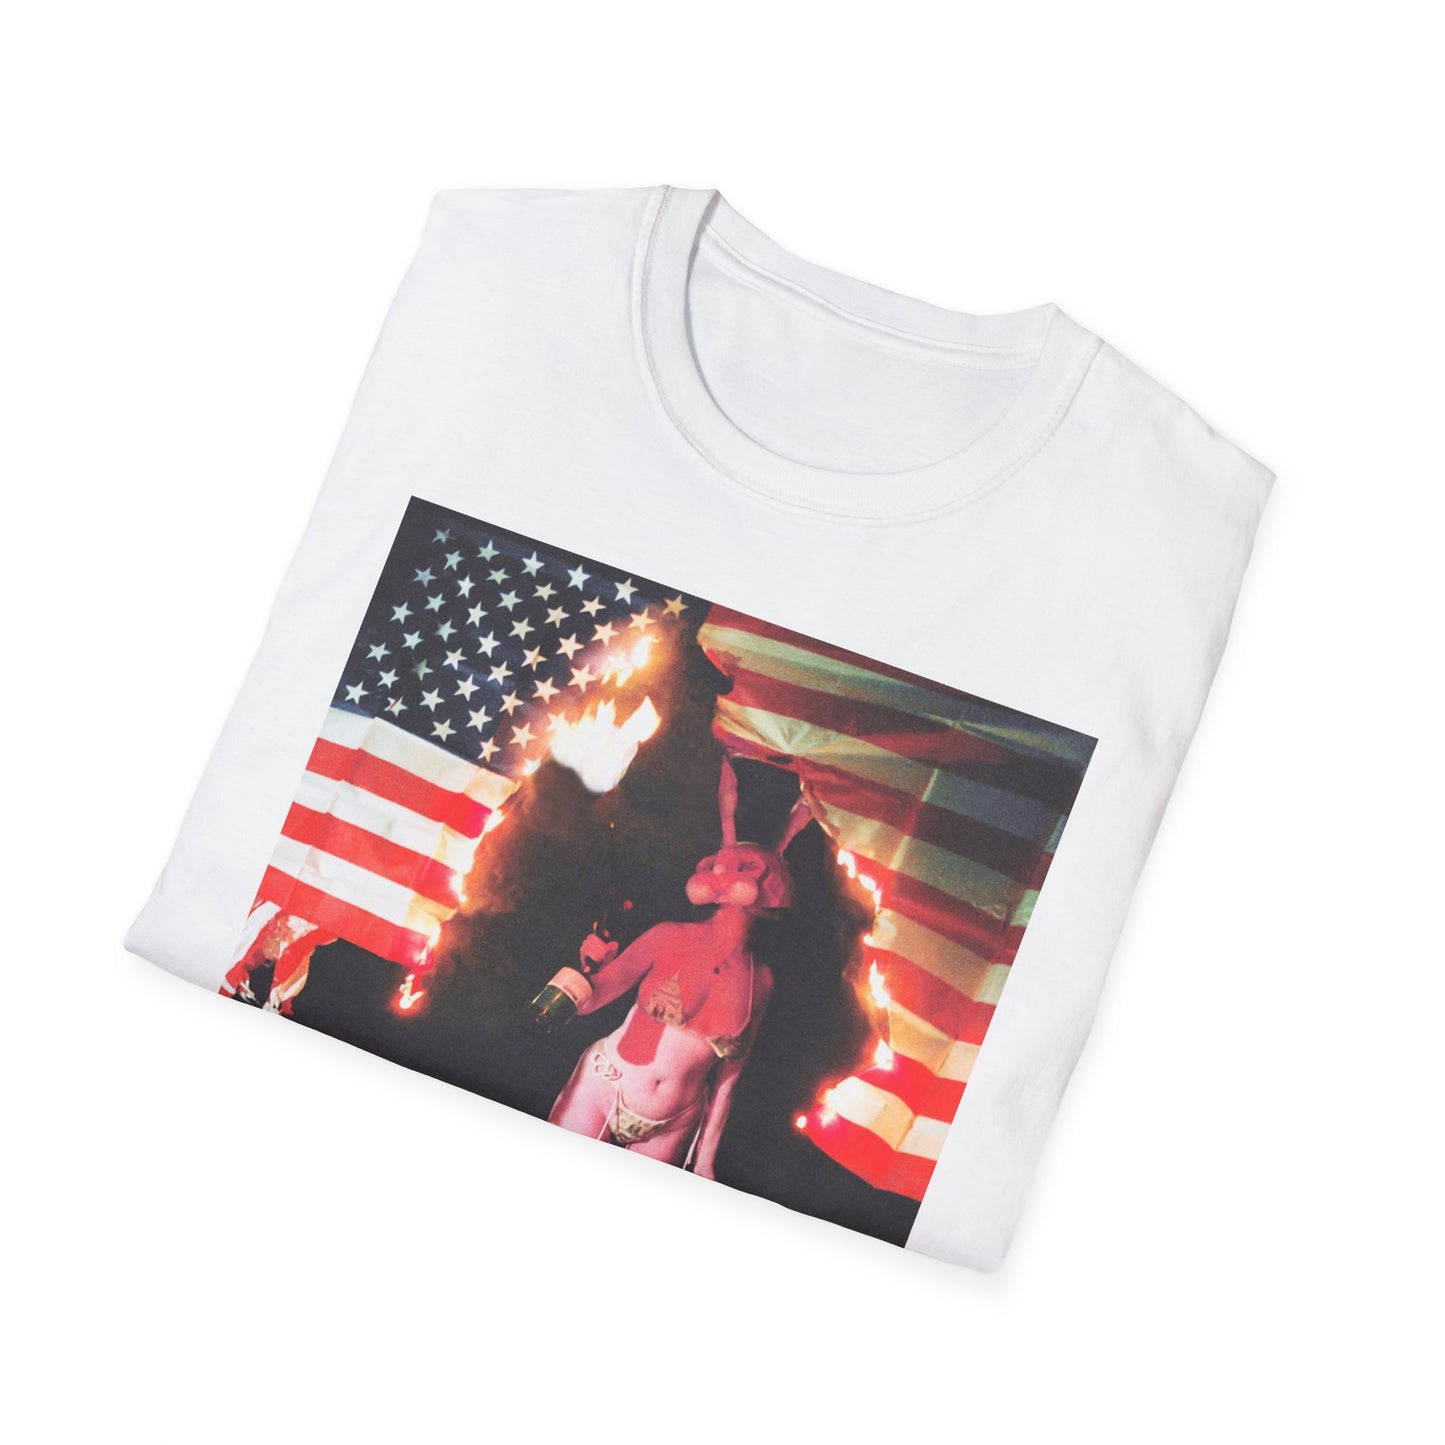 The Bunny Bless America T-Shirt